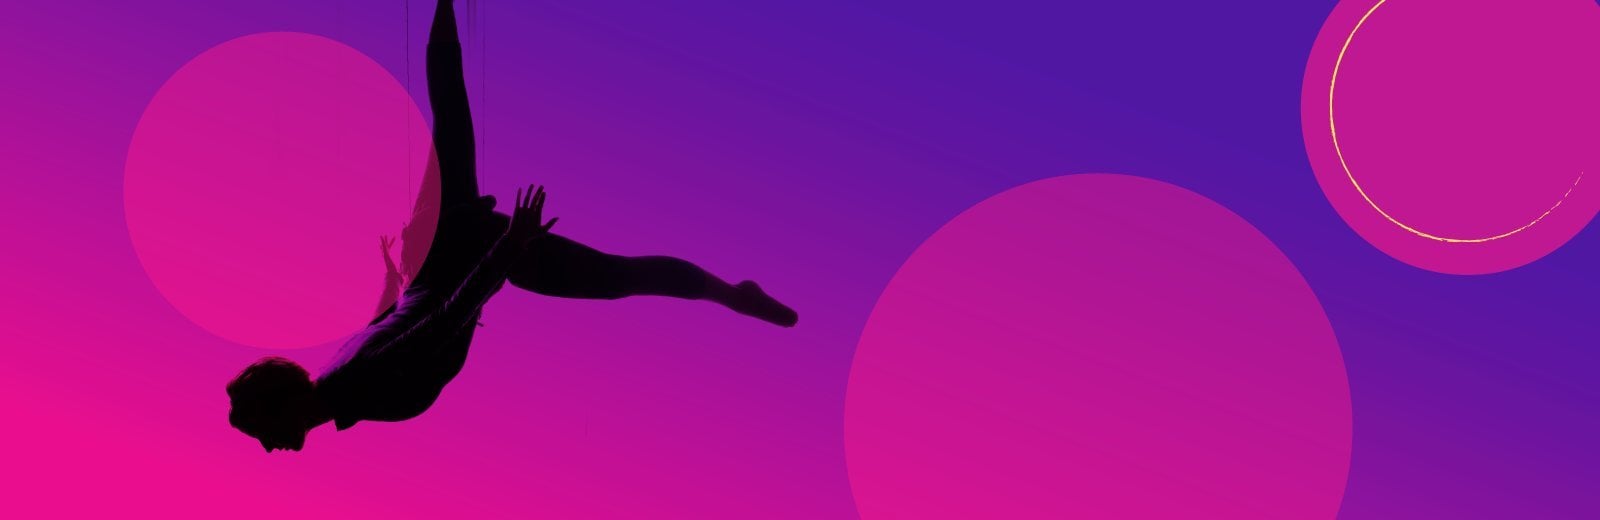 Purple background with pink circles and a dancer silhouette.